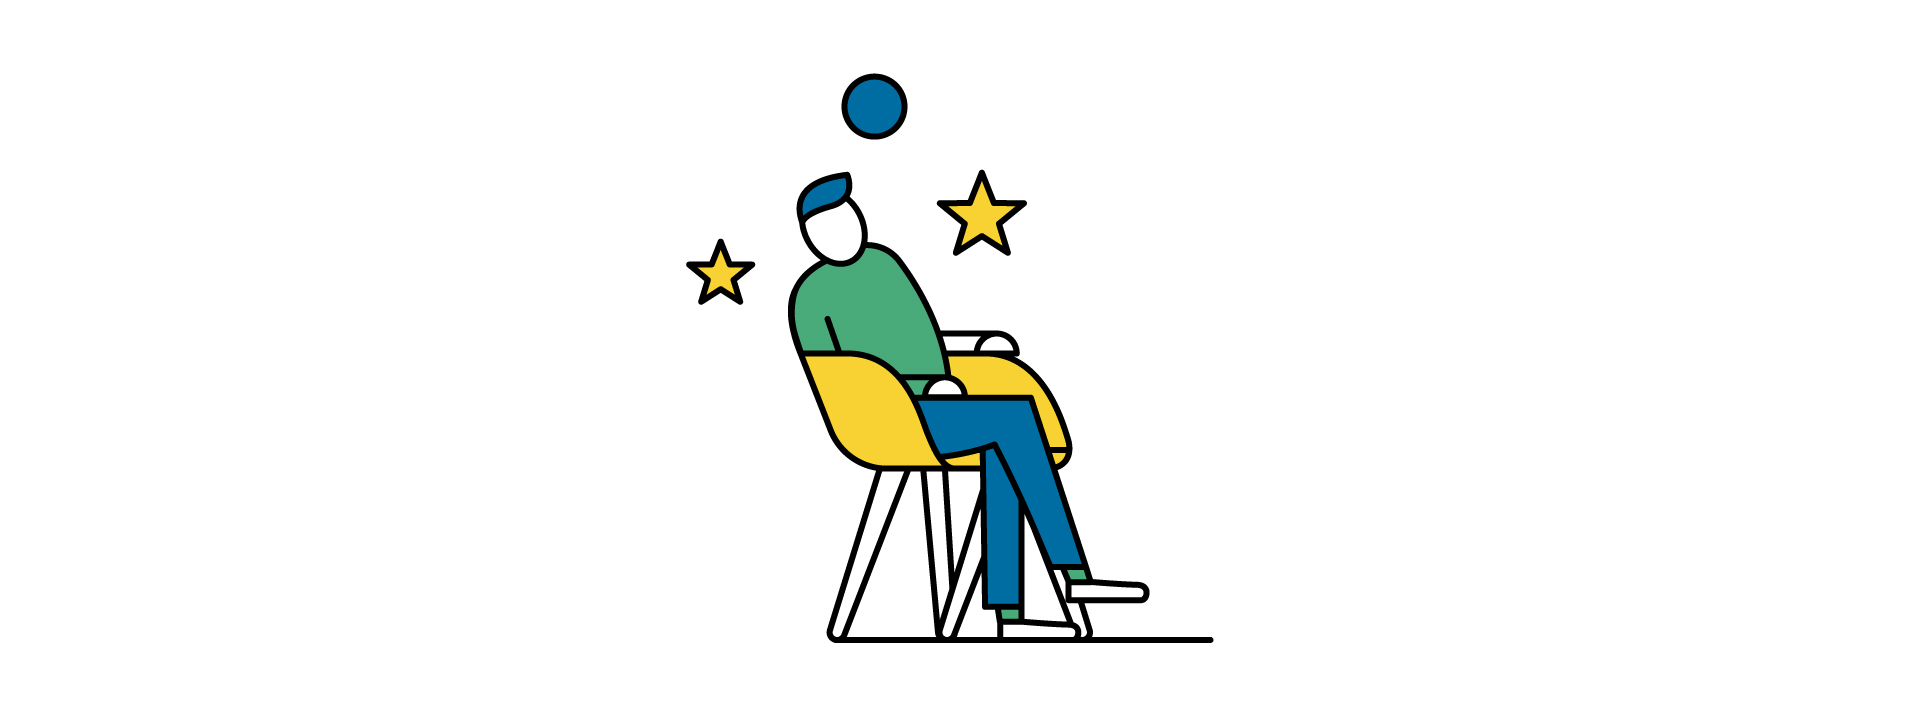 An illustration showing someone relaxing